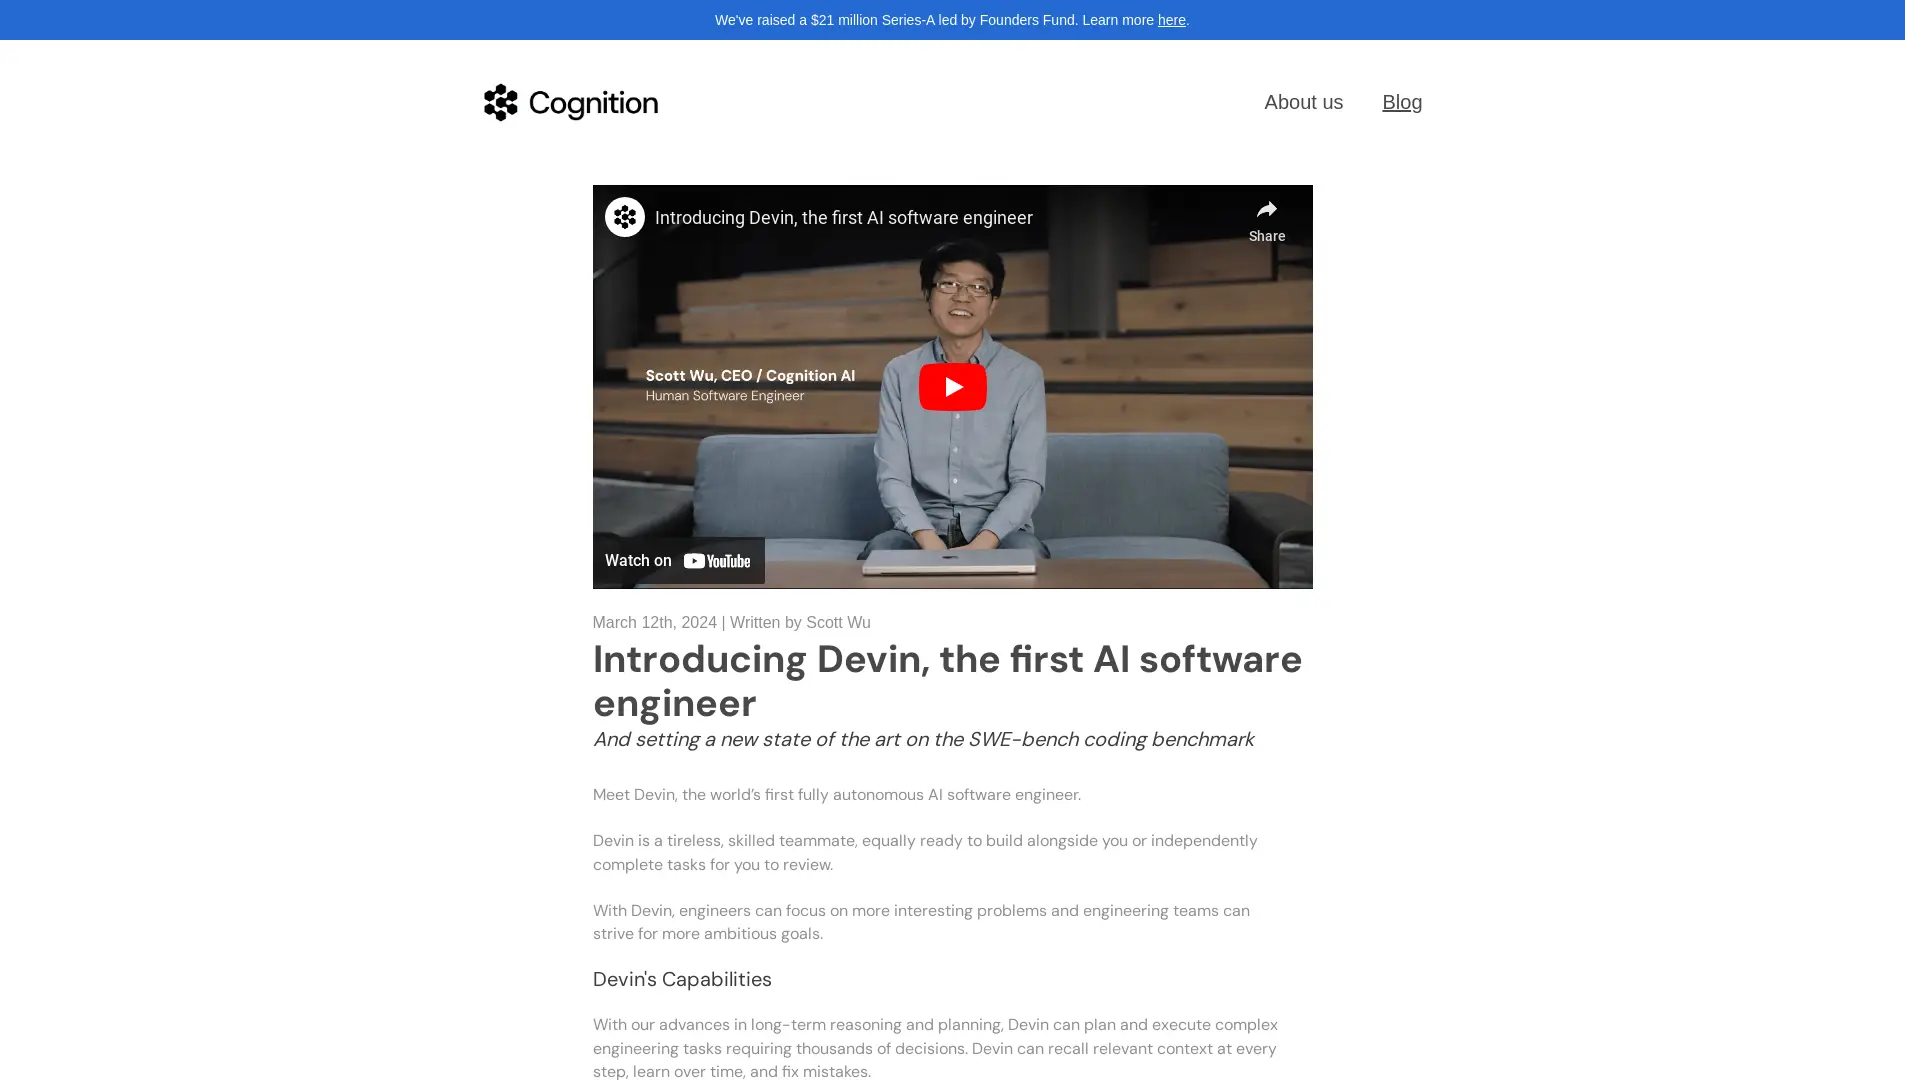 Devin - AI Coder by Cognition